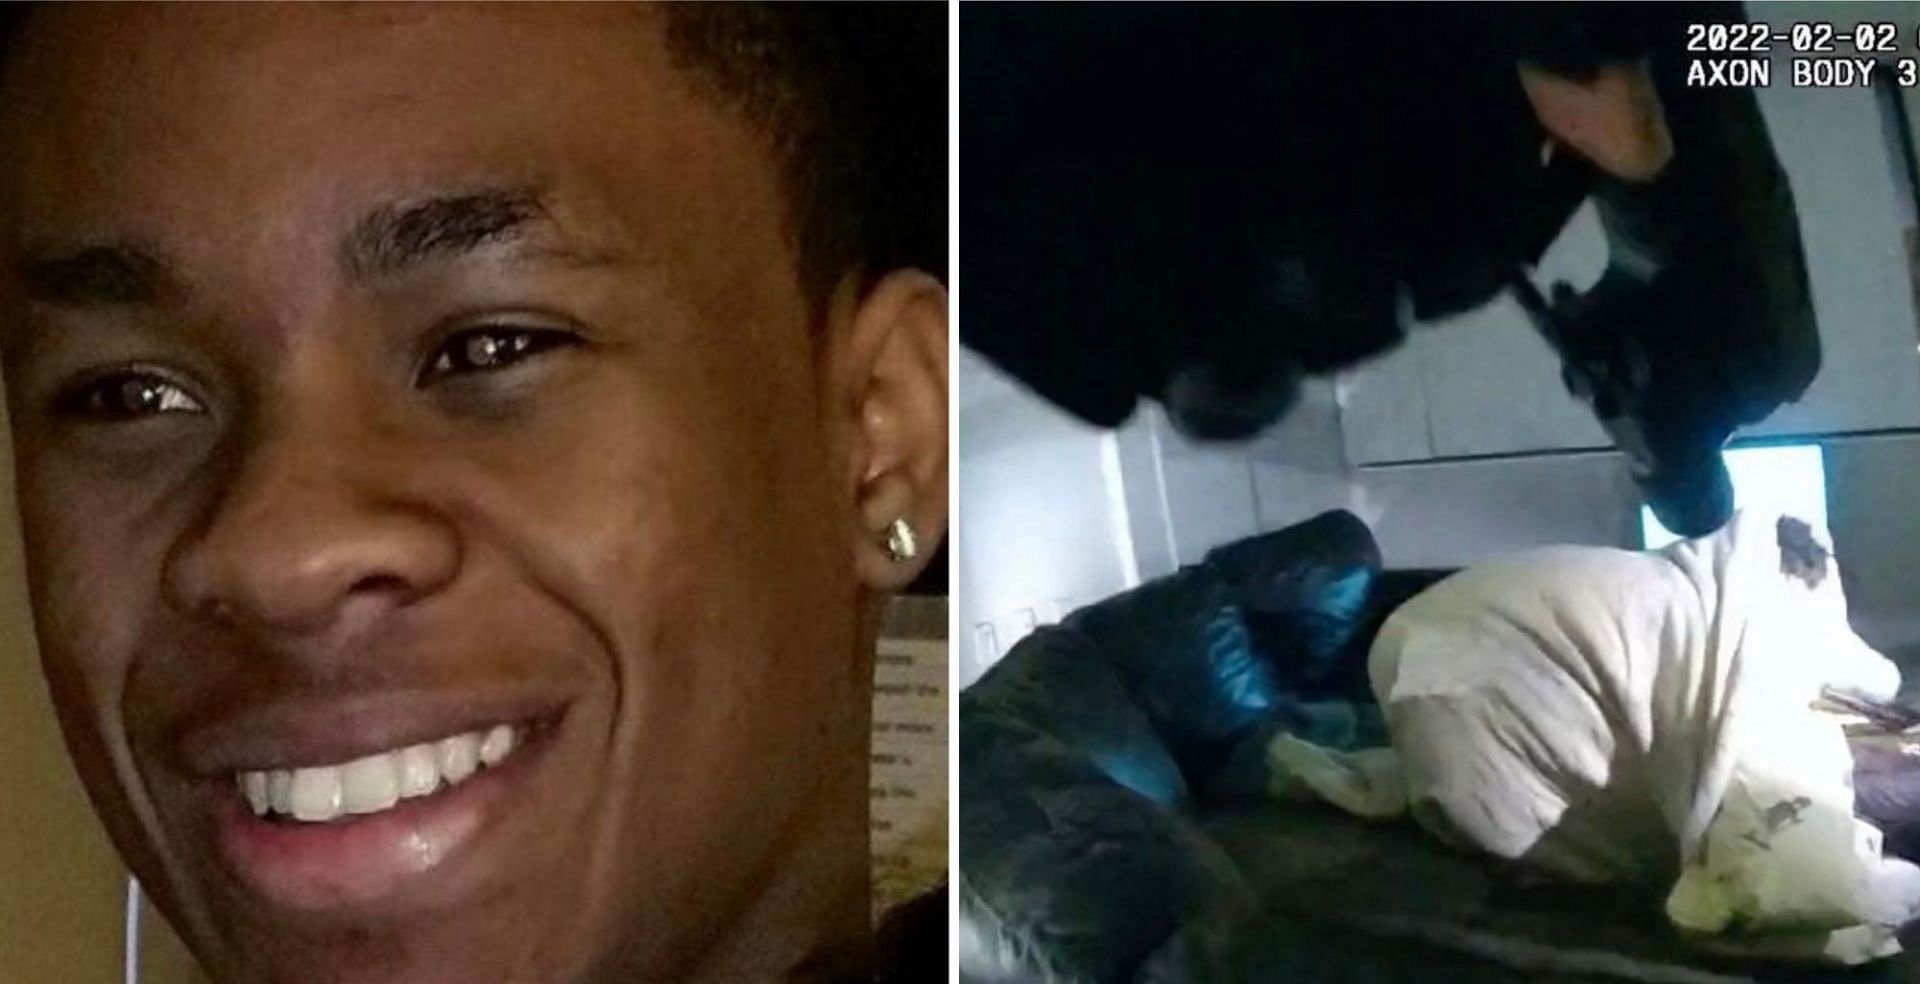 Amir Locke was shot dead during a search investigation by the Minneapolis Police Department (Image via OmarJimenez/Twitter and Minneapolis Police Department)